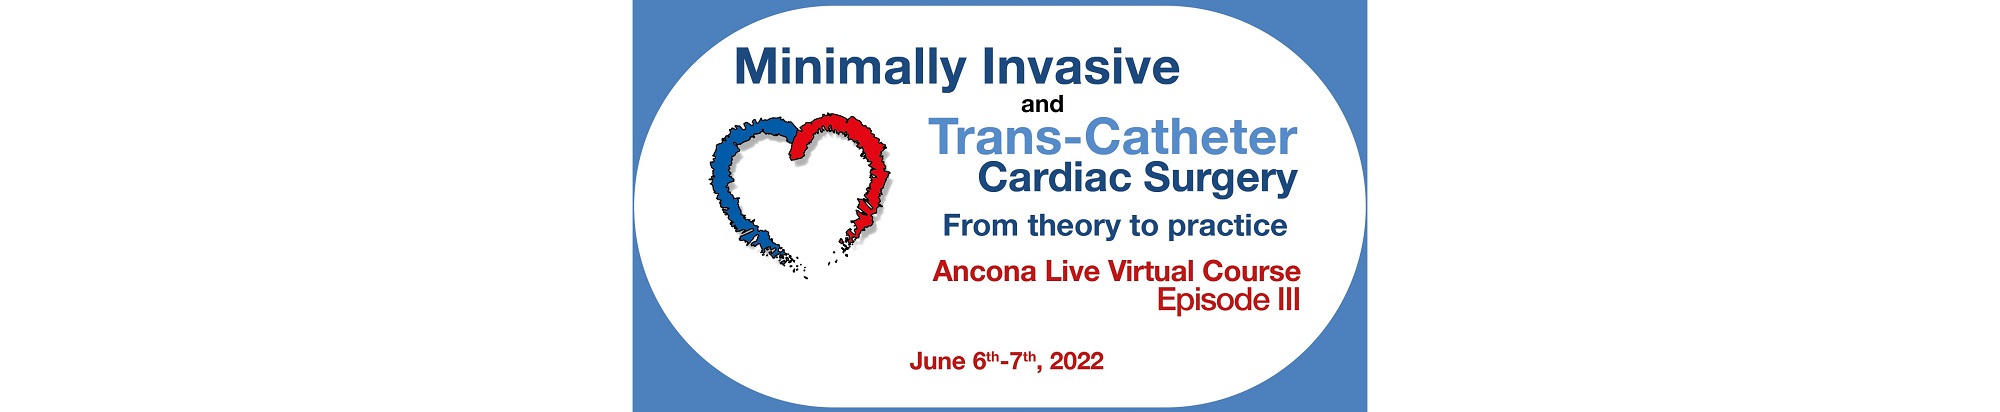 ANCONA LIVE VIRTUAL COURSE Episode III
Minimally Invasive and Trans-Catheter Cardiac Surgery - from Theory to Practice